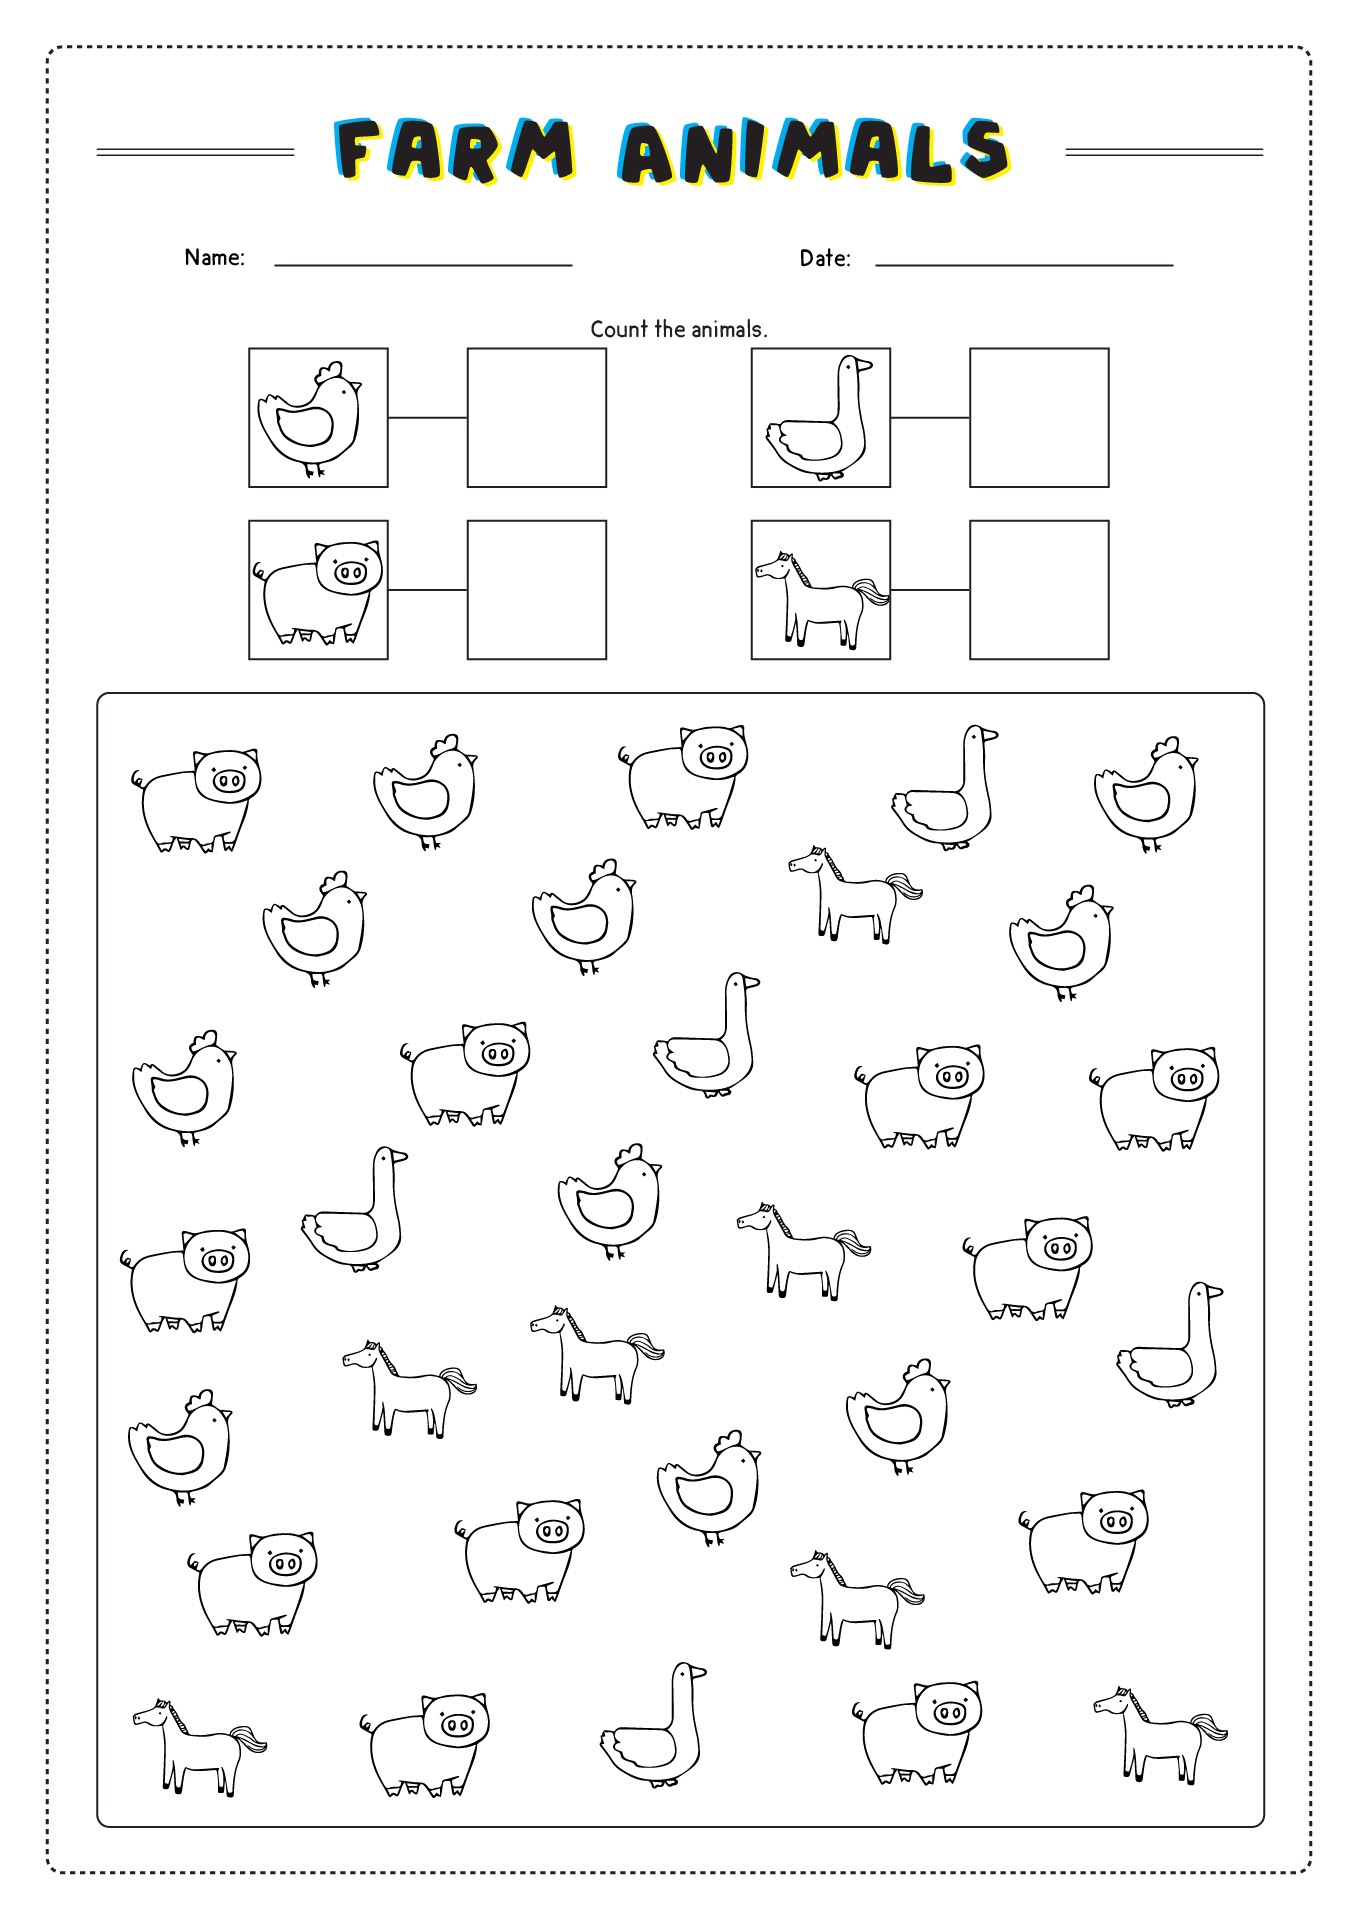 animal-match-word-to-picture-free-animal-worksheets-preschool